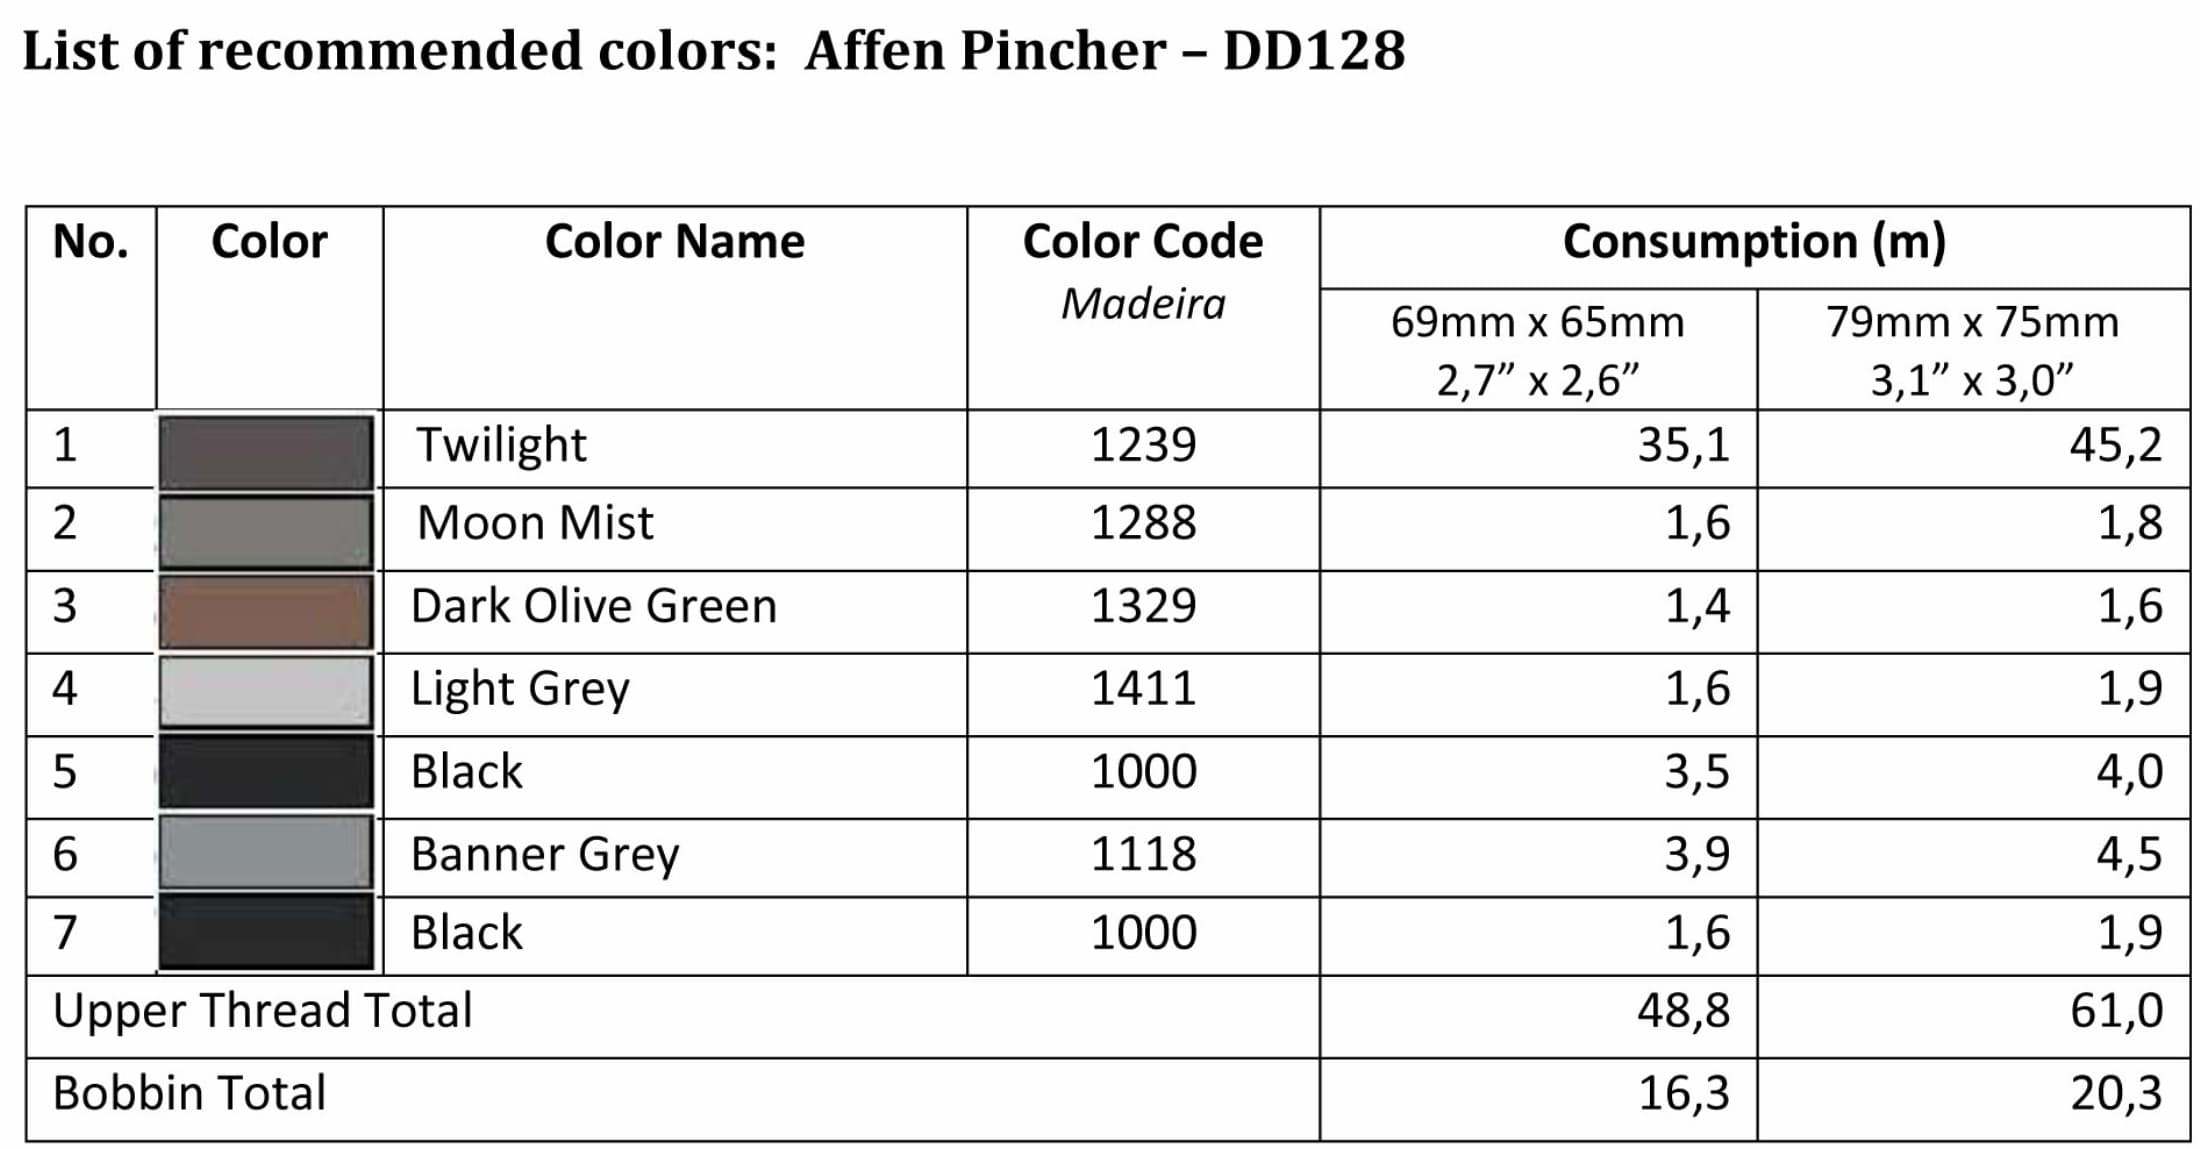 List of recommended colors - DD128